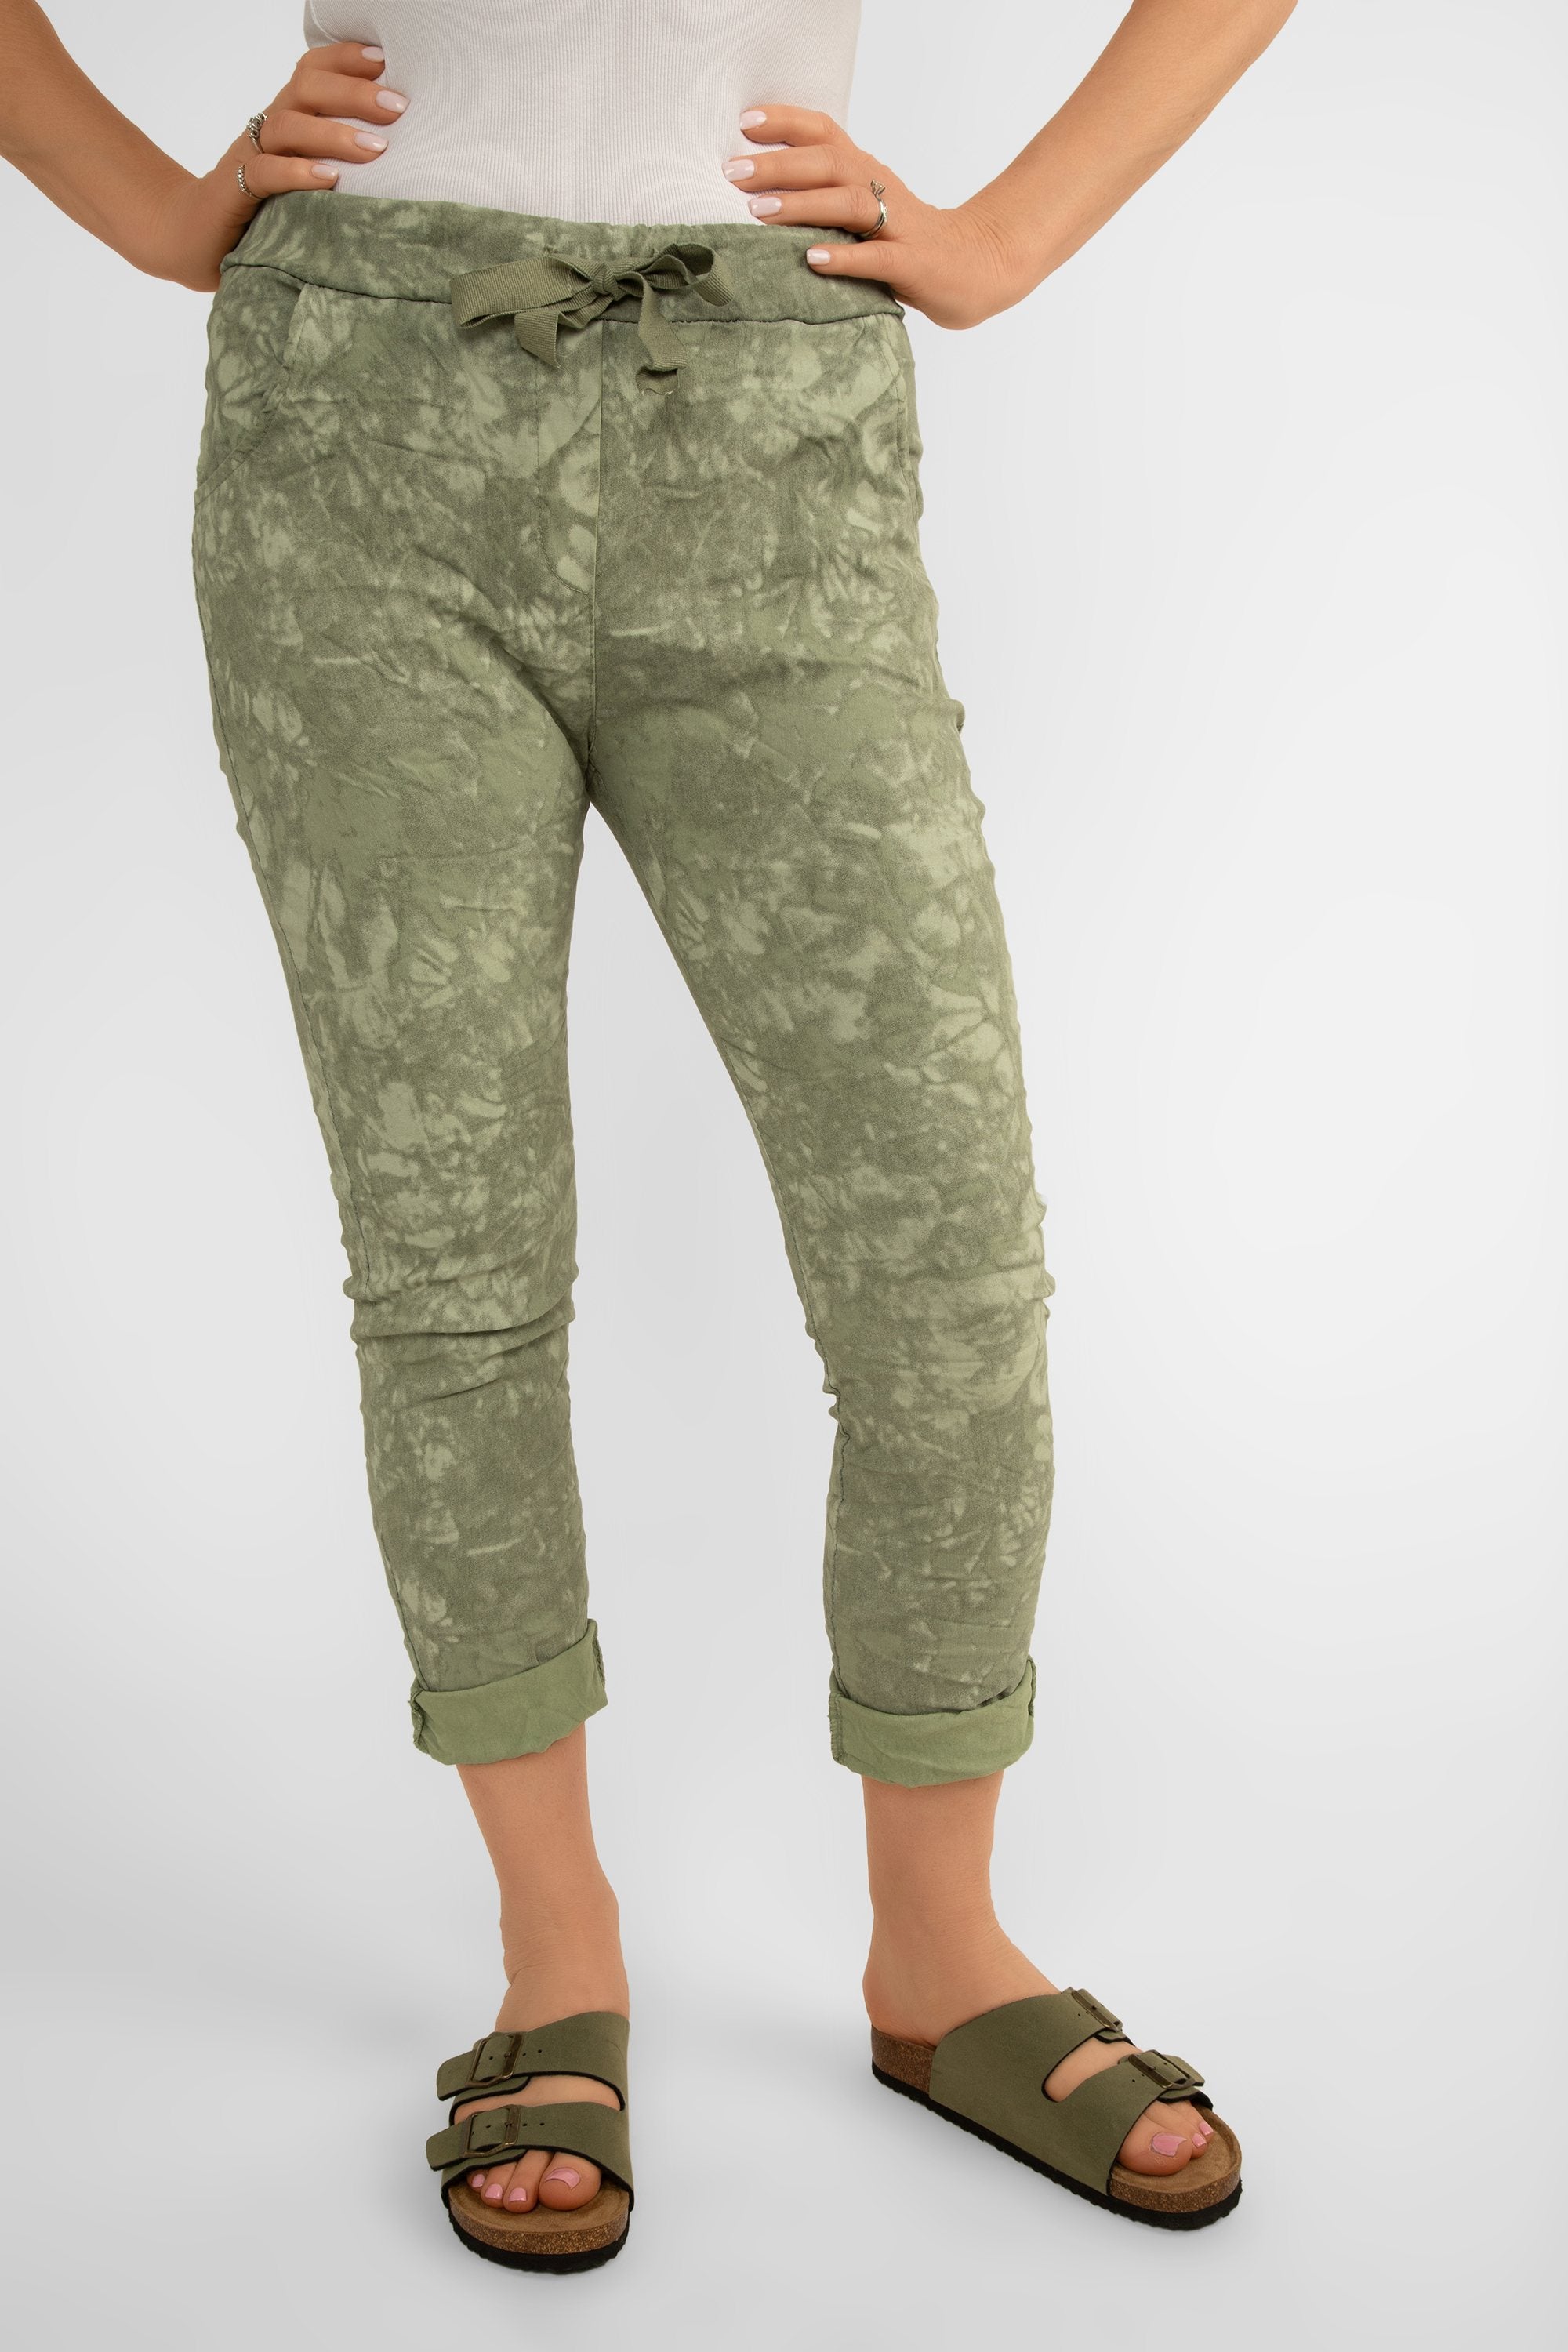 Front view of Bella Amore (21287) Women's Slim Fit Cropped Crinkle Pants with Side Pockets and Drawstring Waist, in Military green tie dye print